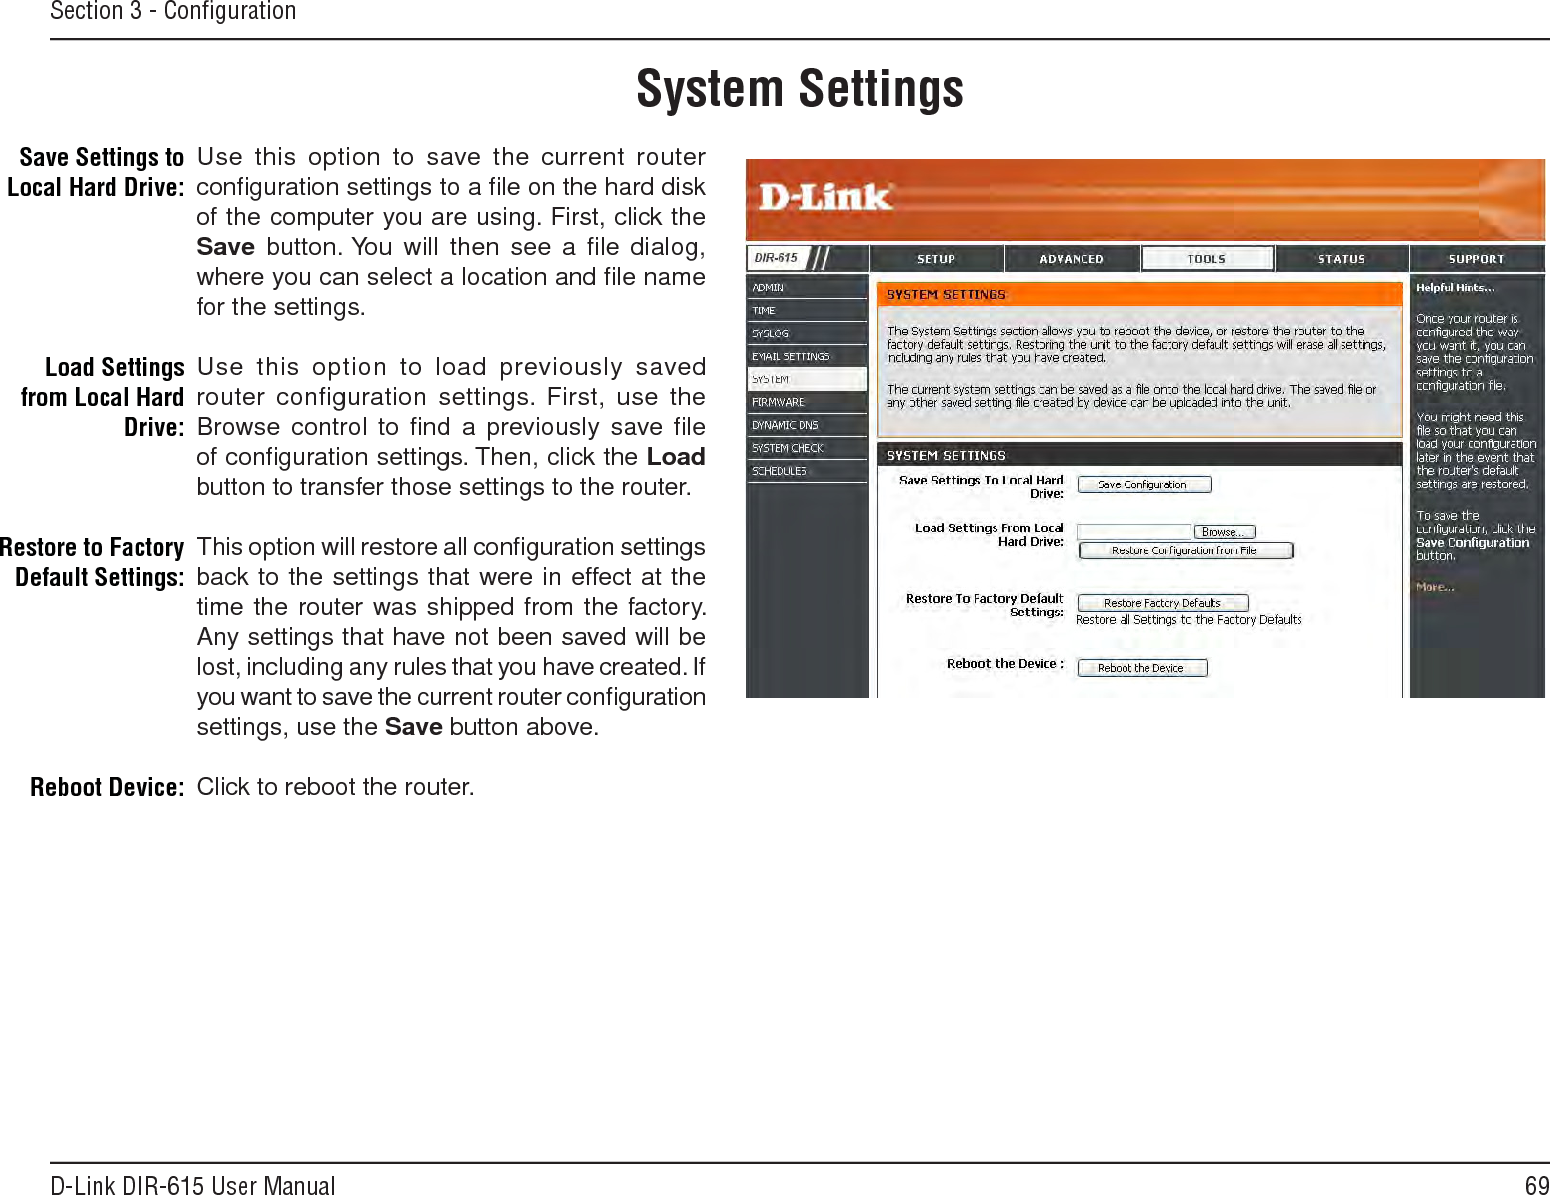 69D-Link DIR-615 User ManualSection 3 - ConﬁgurationUse this option to save the current router conﬁguration settings to a ﬁle on the hard disk of the computer you are using. First, click the Save button. You  will  then  see  a  ﬁle  dialog, where you can select a location and ﬁle name for the settings. Use this option to load previously saved router configuration settings.  First,  use  the Browse control to ﬁnd a previously save ﬁle of conﬁguration settings. Then, click the Load button to transfer those settings to the router. This option will restore all conﬁguration settings back to the settings that were in effect at the time the router was shipped from the factory. Any settings that have not been saved will be lost, including any rules that you have created. If you want to save the current router conﬁguration settings, use the Save button above. Click to reboot the router.Save Settings to Local Hard Drive:Load Settings from Local Hard Drive:Restore to Factory Default Settings:Reboot Device:System Settings